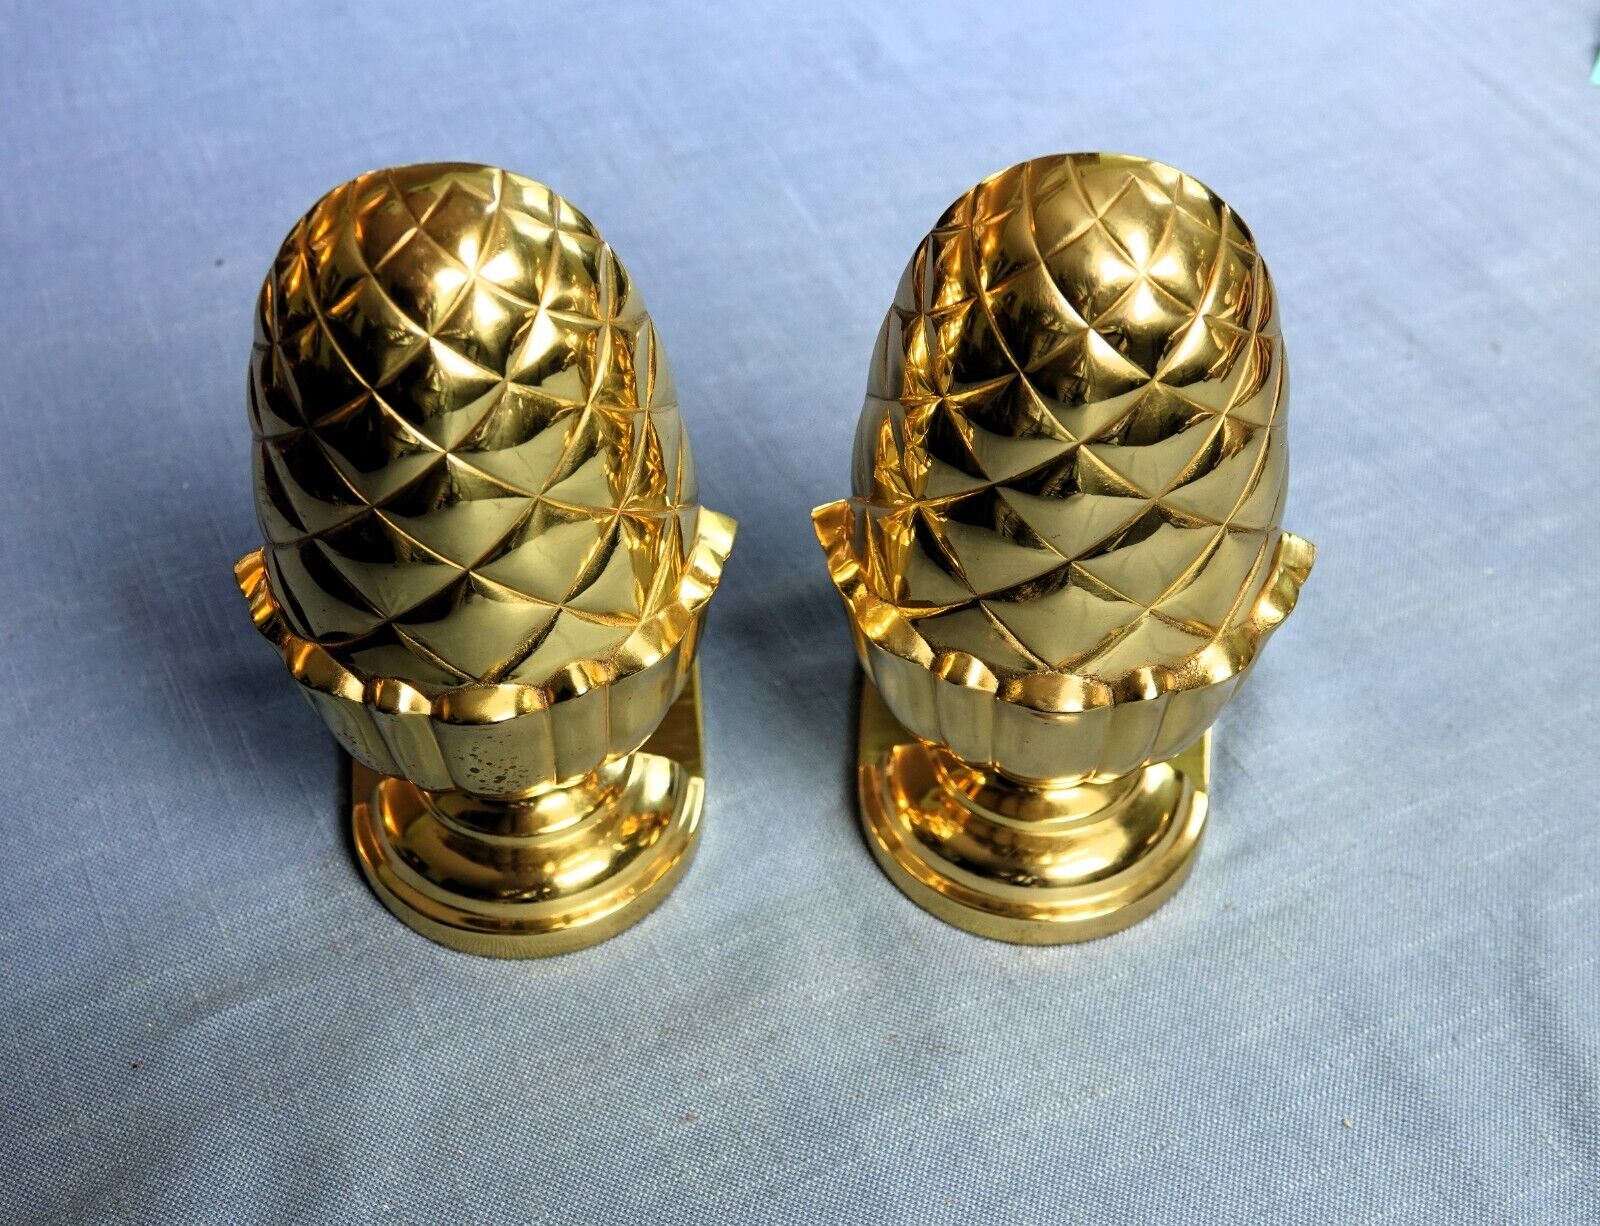 SET OF 2 BOOKENDS GOLD LACQUERED METAL PINEAPPLE THEME 7.0